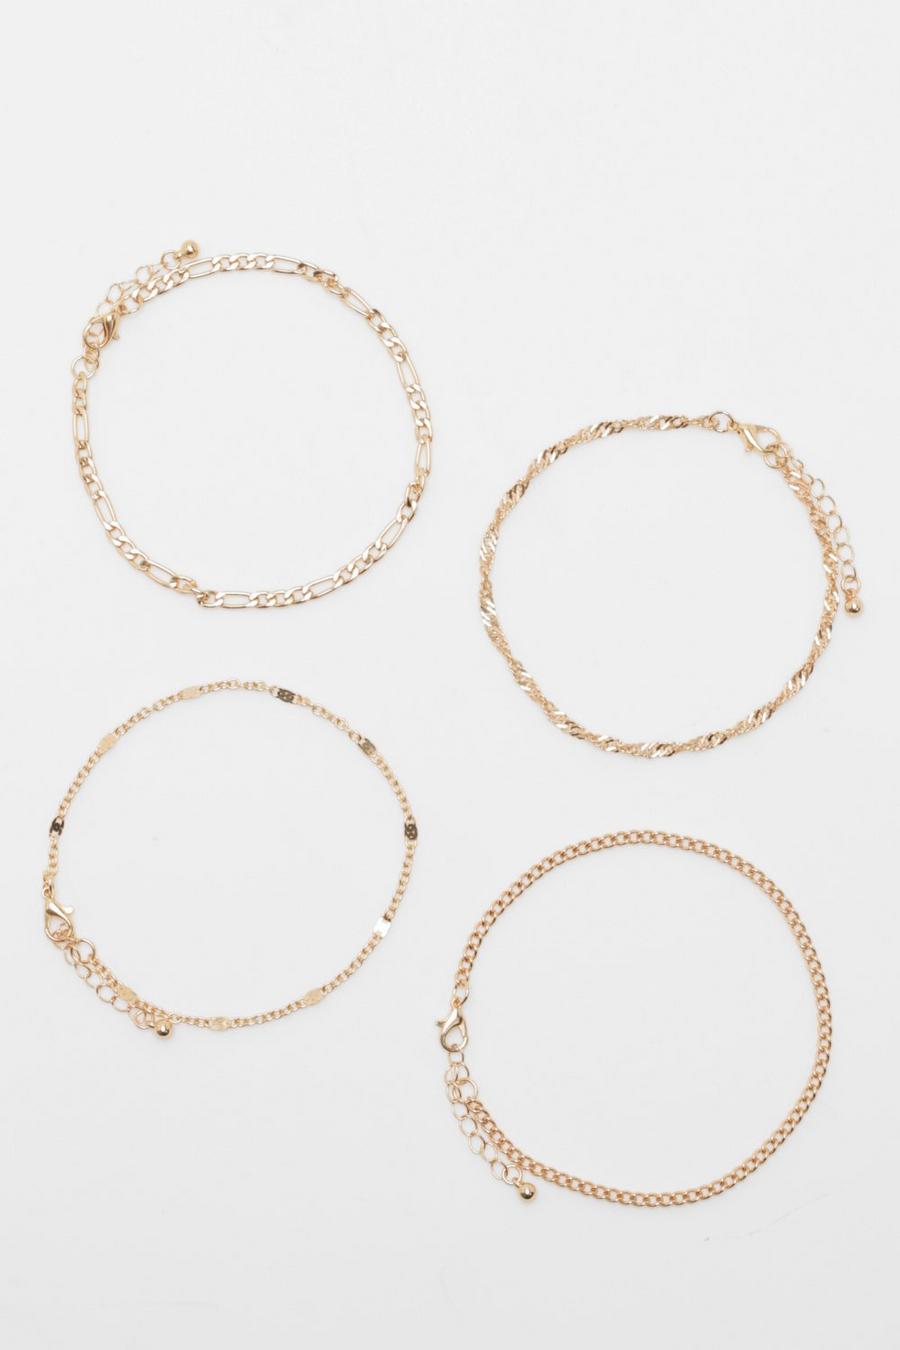 Gold metallic Mix Chain 4 Pack Anklets